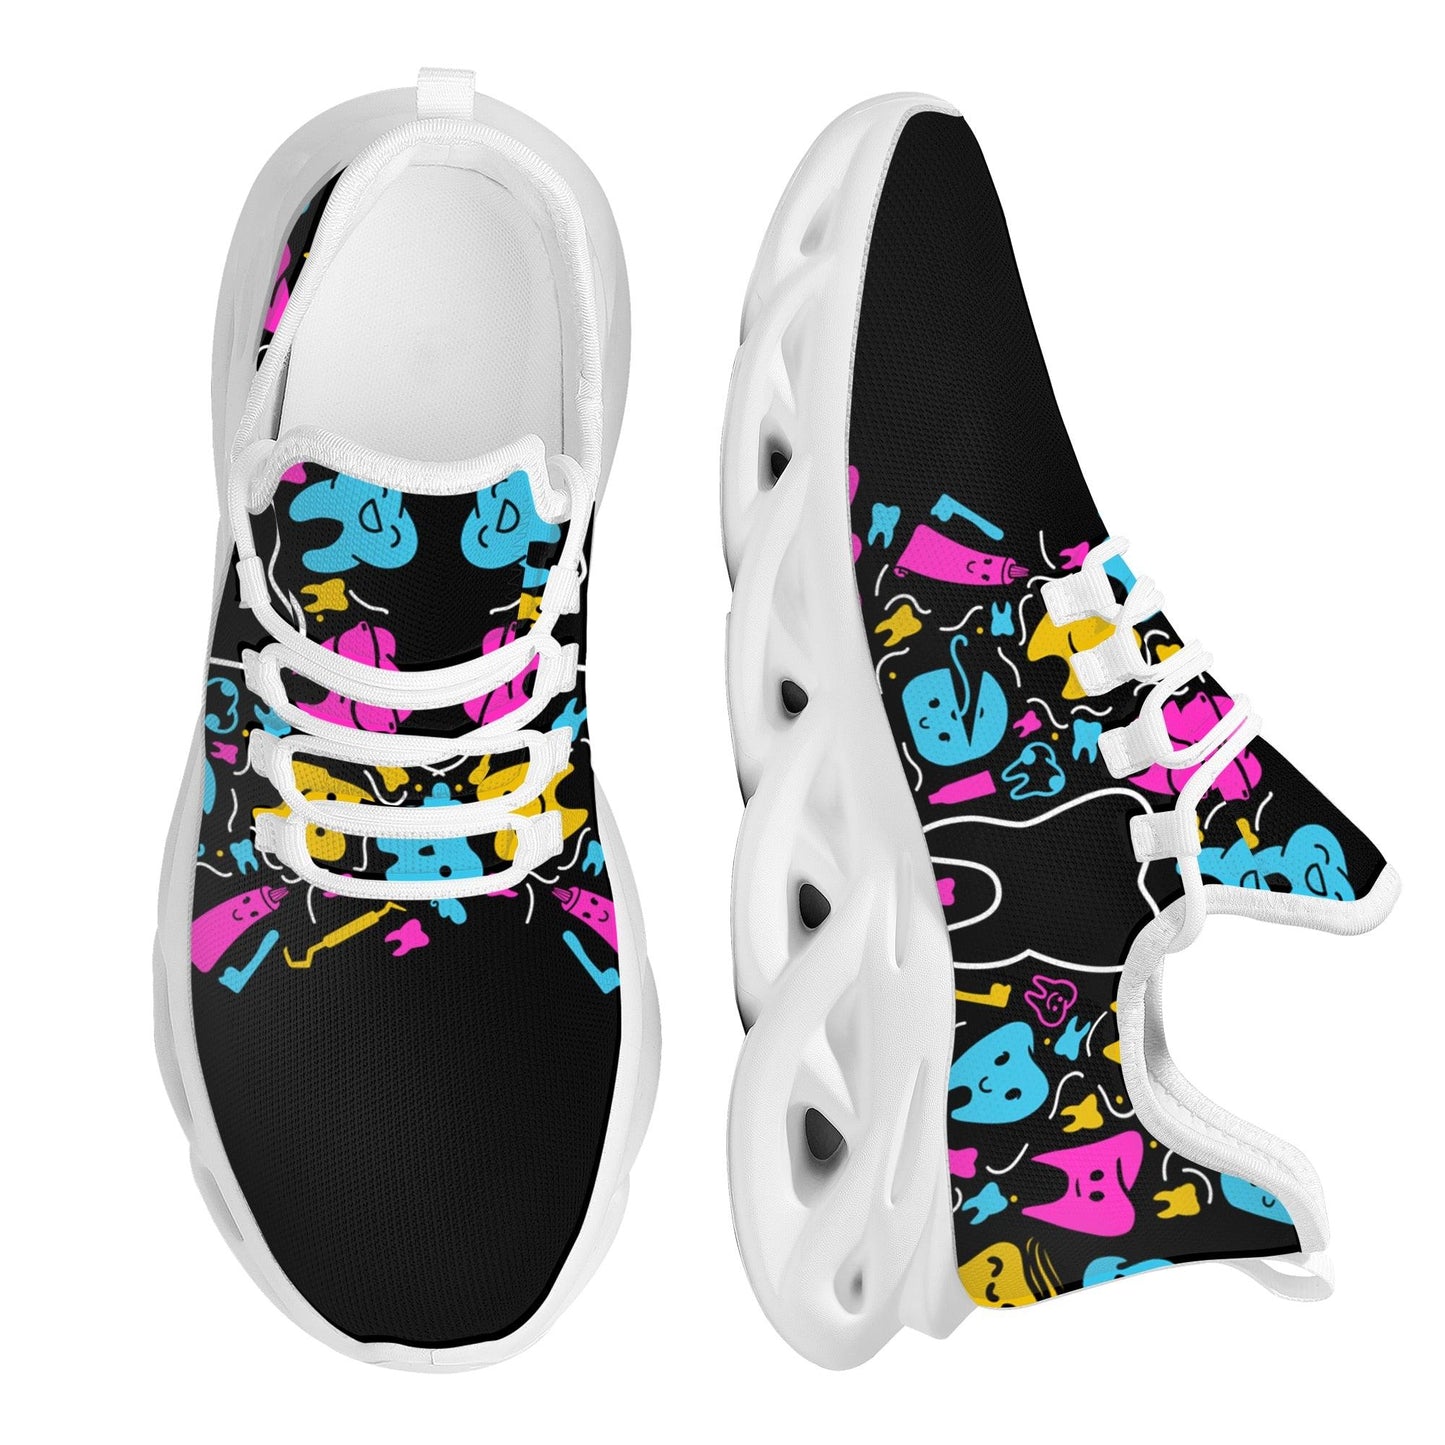 Dentist Medical Items Starry Sky Sneakers - Thumbedtreats